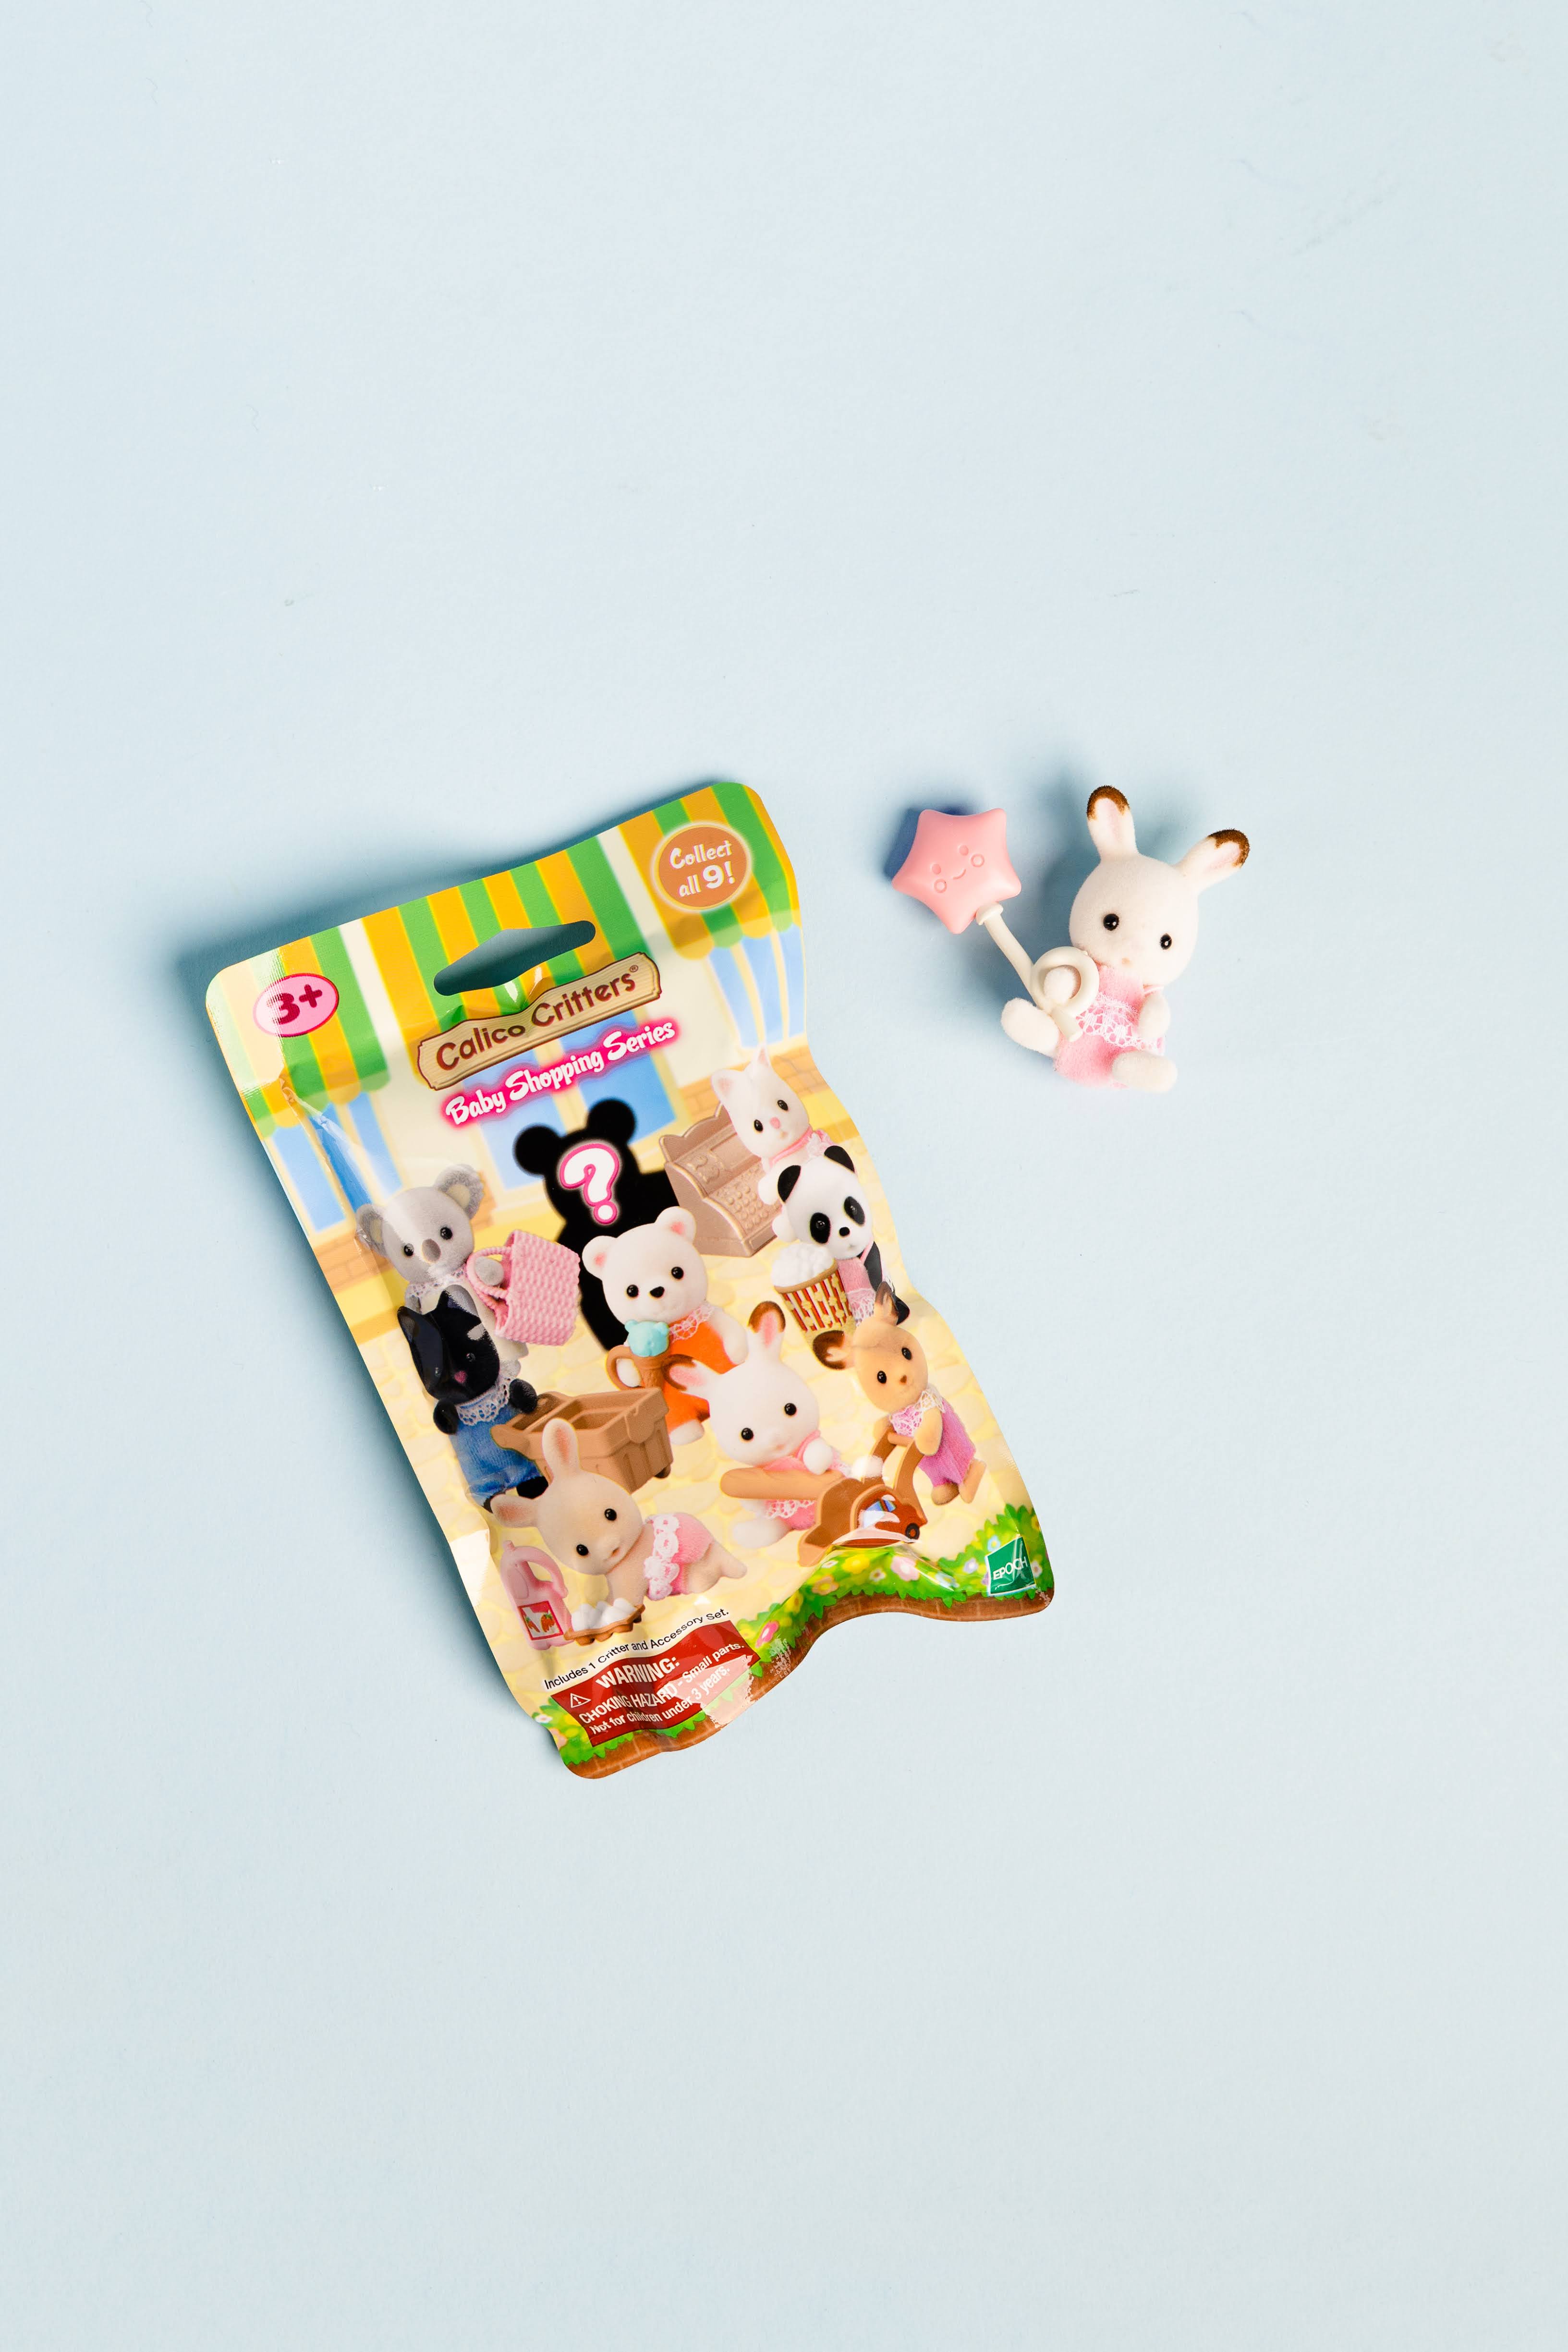 CALICO CRITTERS Blind Bag Multiple Series YOU PICK! UPDATED 8/18